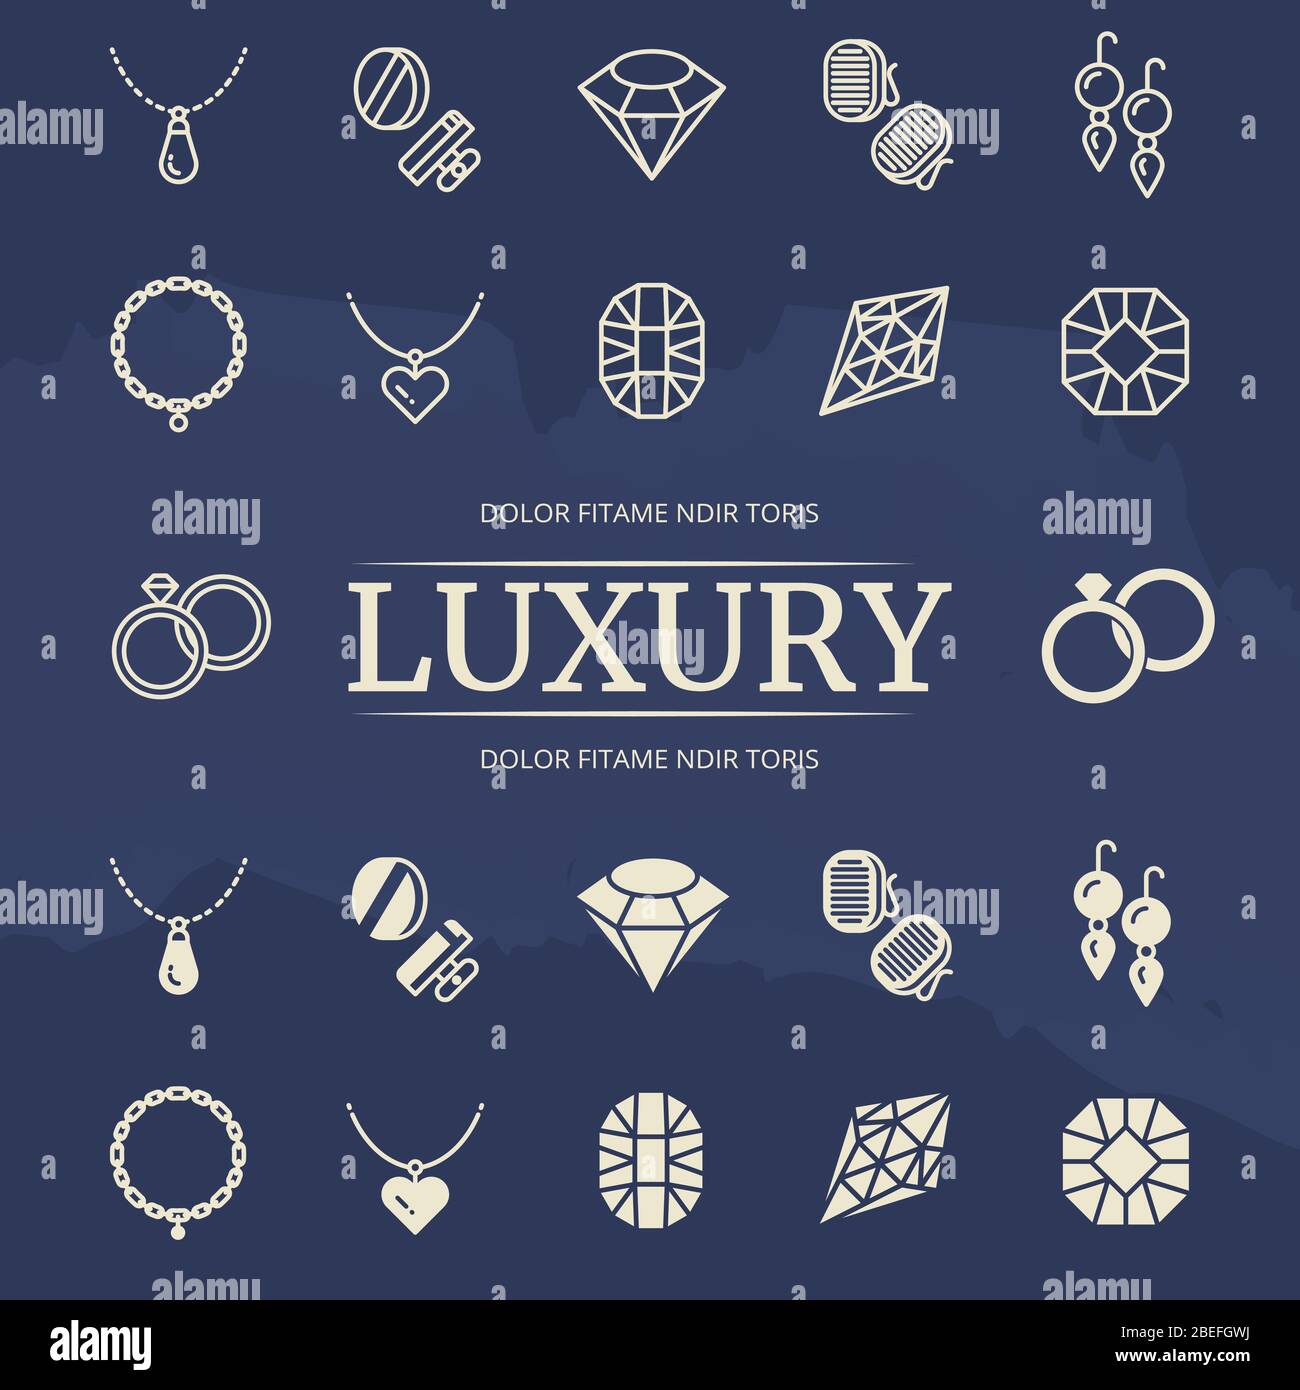 Jewelry and diamonds line and silhouette icons set on grunge background ...